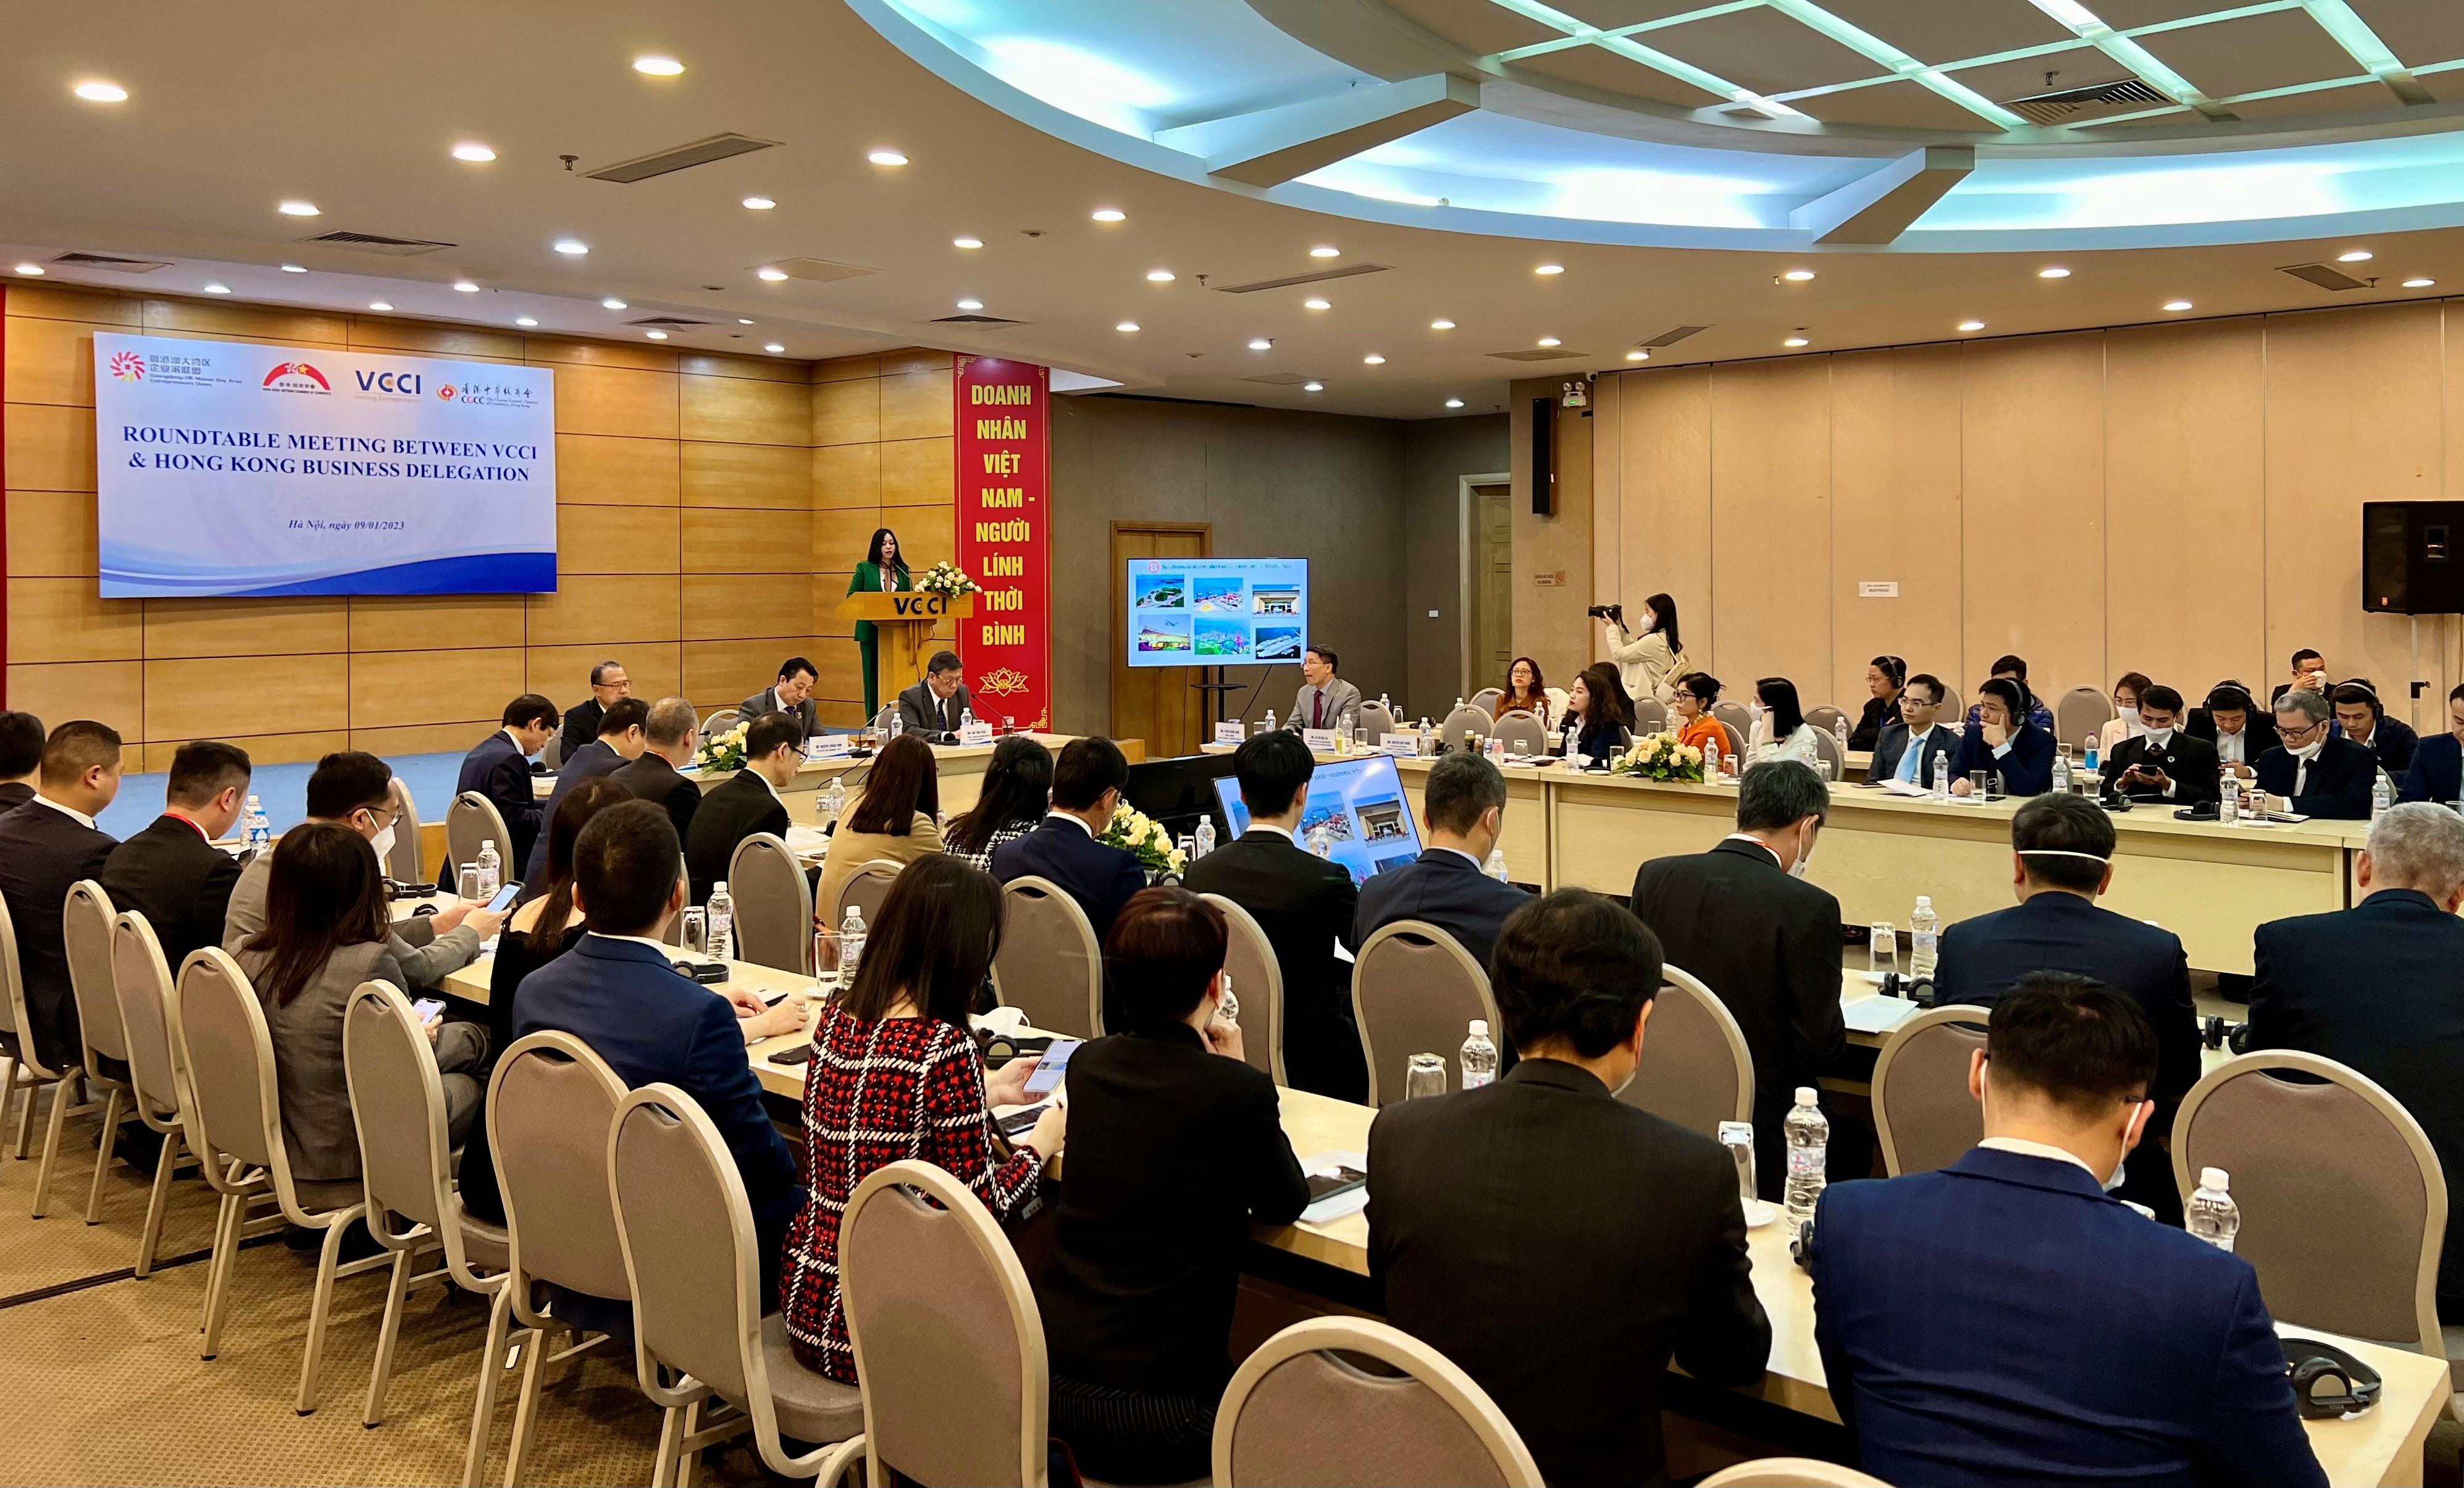 The Secretary for Commerce and Economic Development, Mr Algernon Yau, met with members of the Vietnam Chamber of Commerce and Industry in Hanoi, Vietnam, today (January 9) to promote Hong Kong's business advantages and investment opportunities. A Hong Kong business delegation jointly organised by a number of Hong Kong chambers of commerce also attended the meeting.